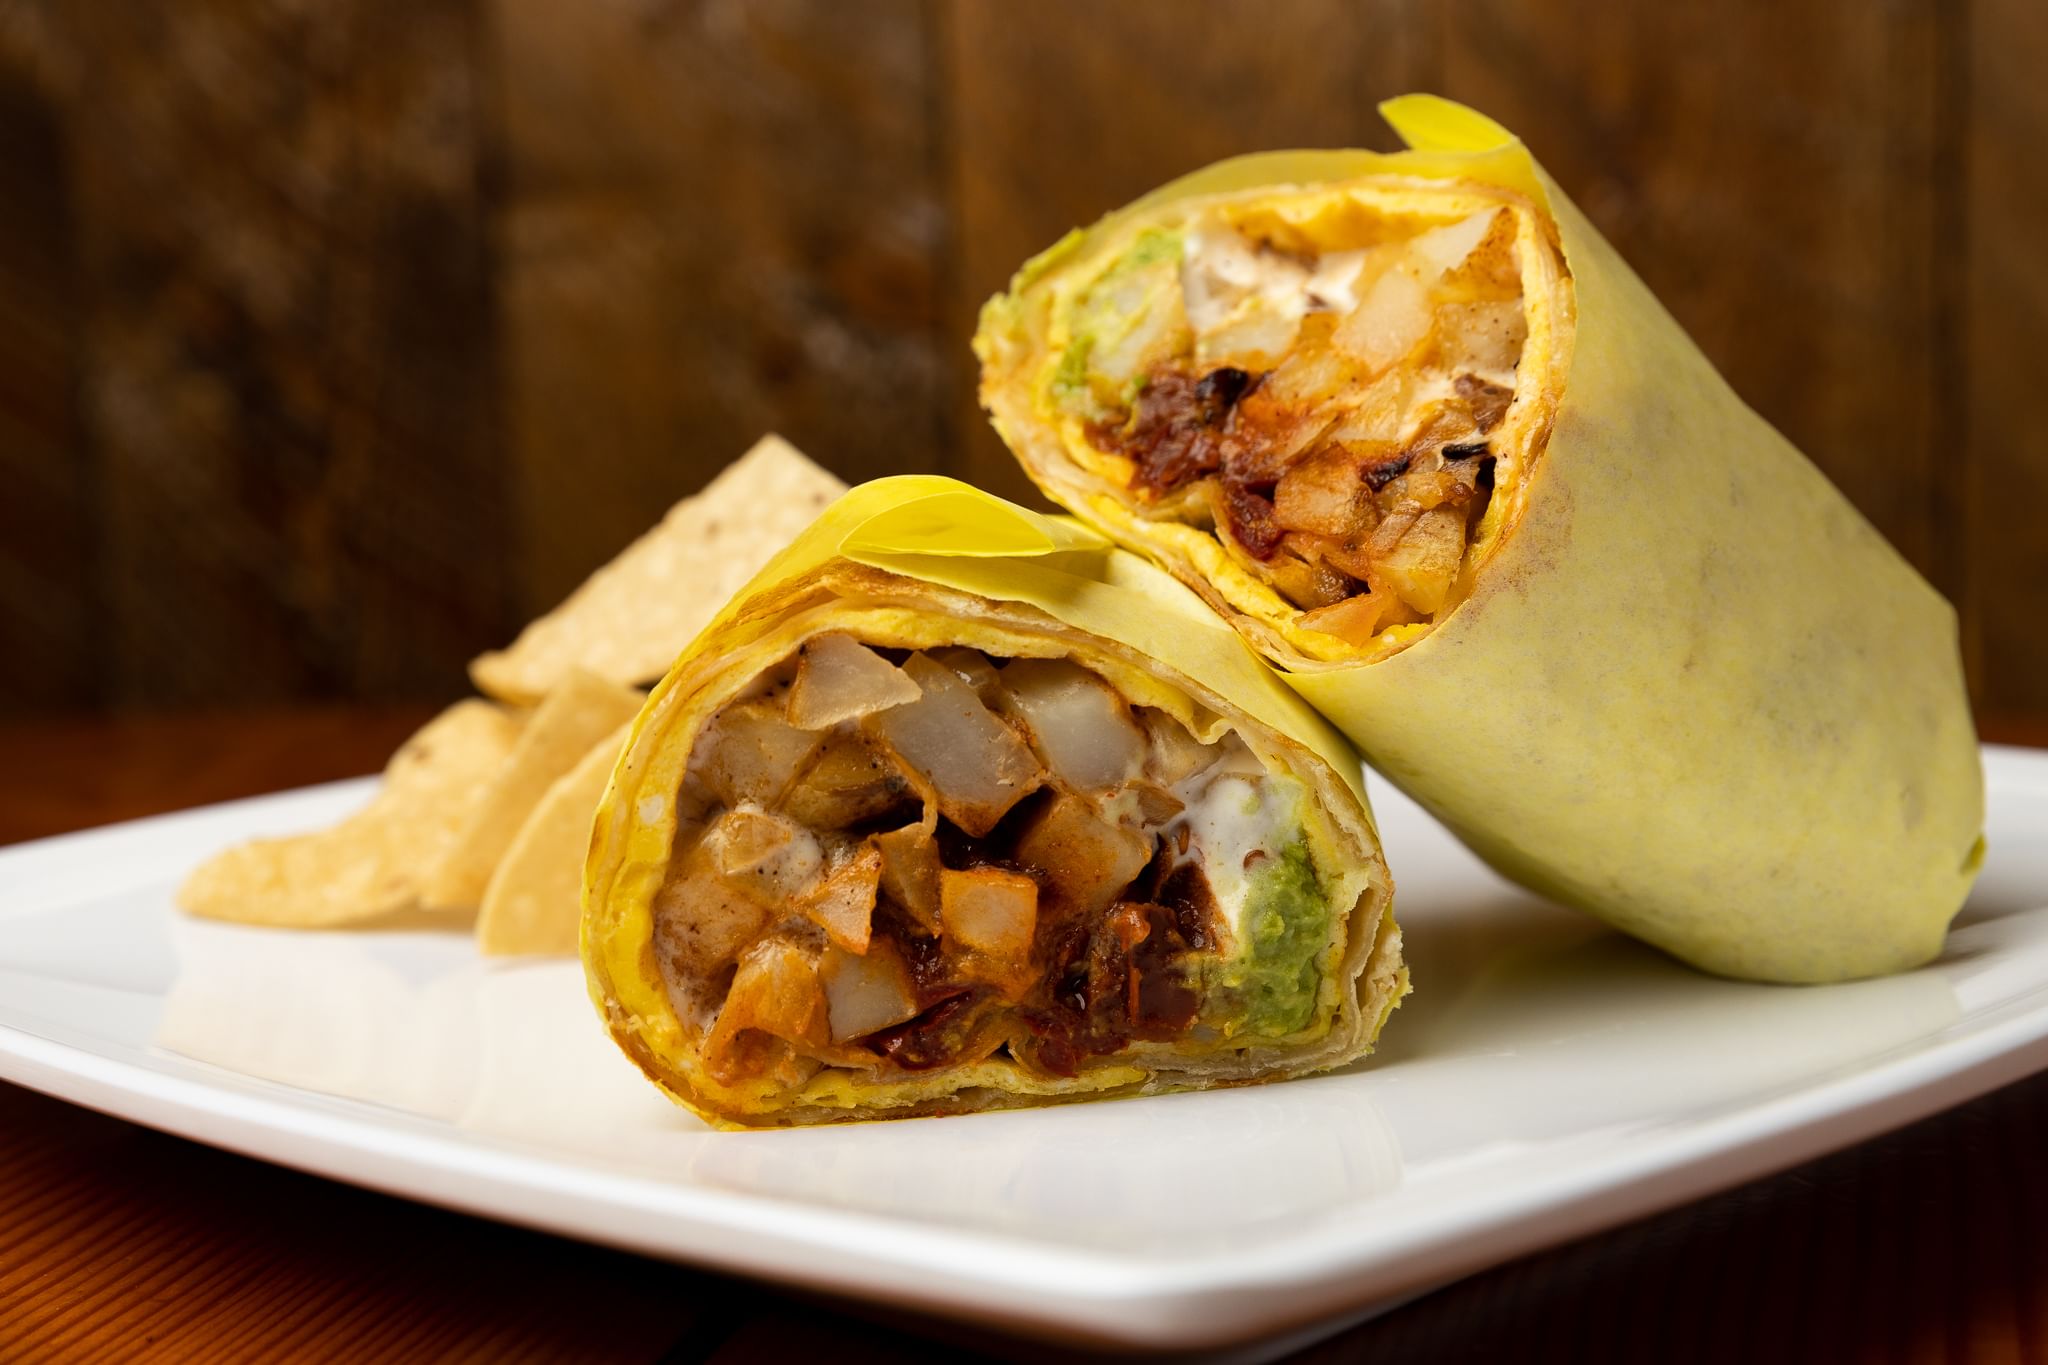 Satisfy Your Cravings with a Hearty Breakfast Burrito